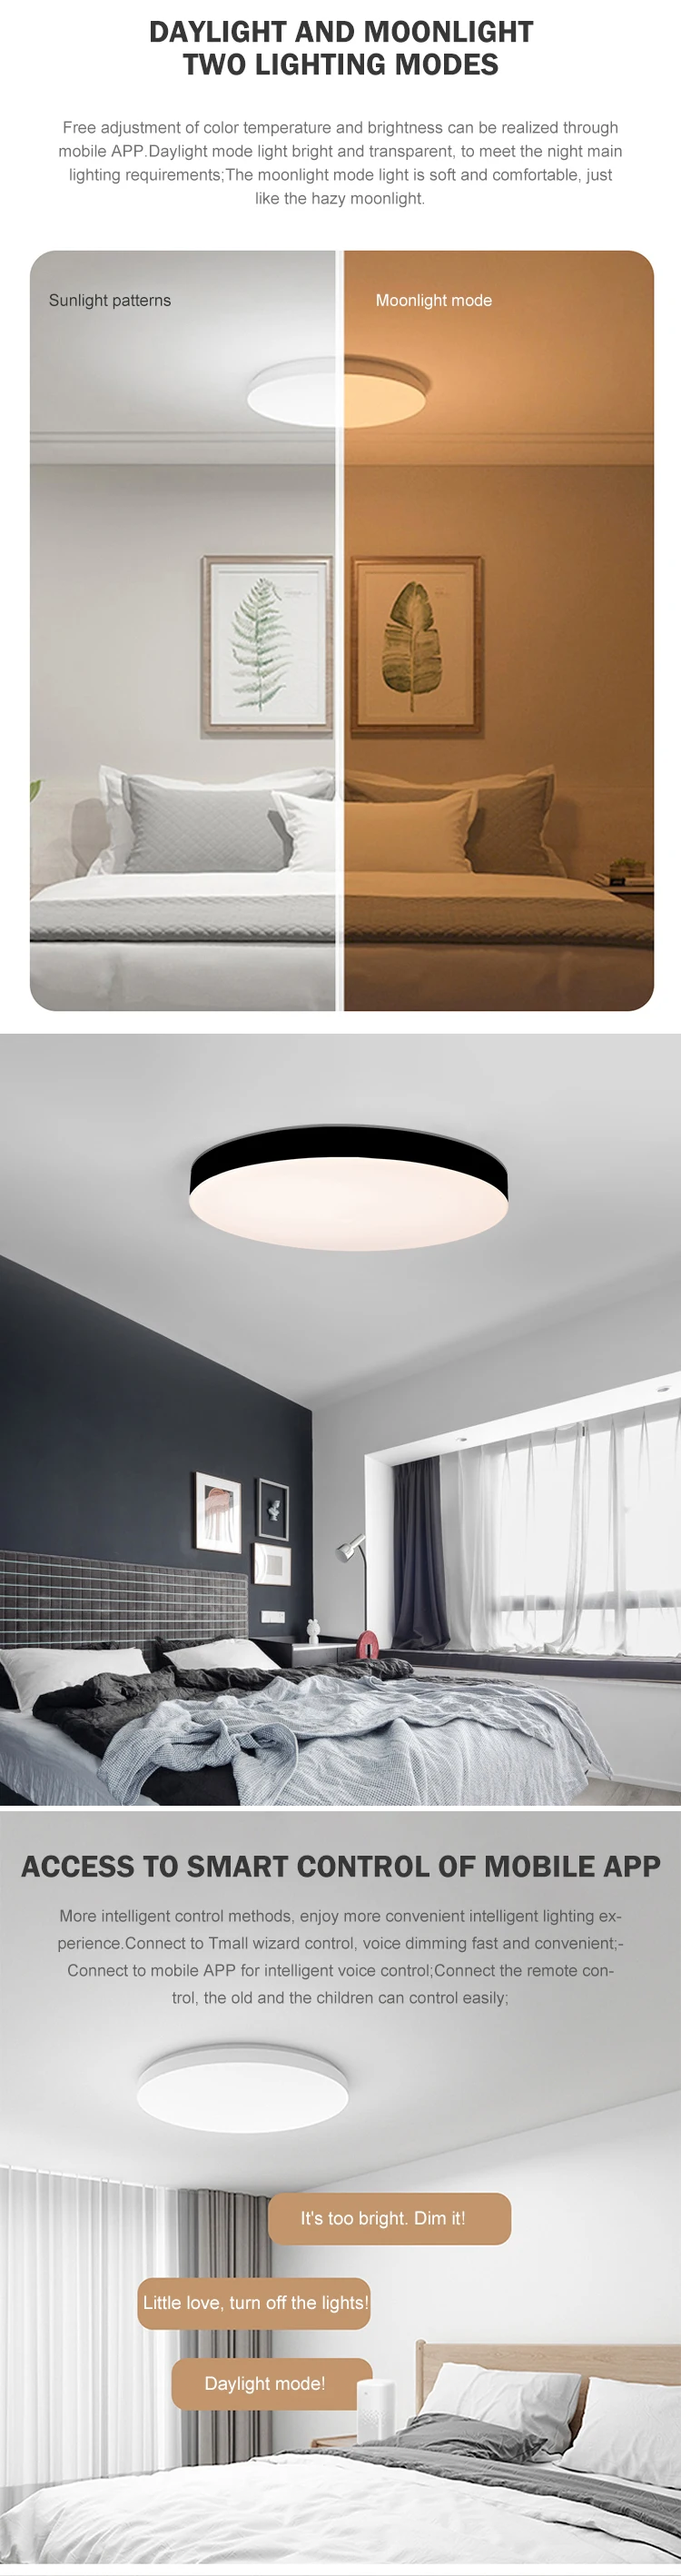 Save energy PC unbreakable material surface mounted hanging IP50 30w 45w 60w round led ceiling light